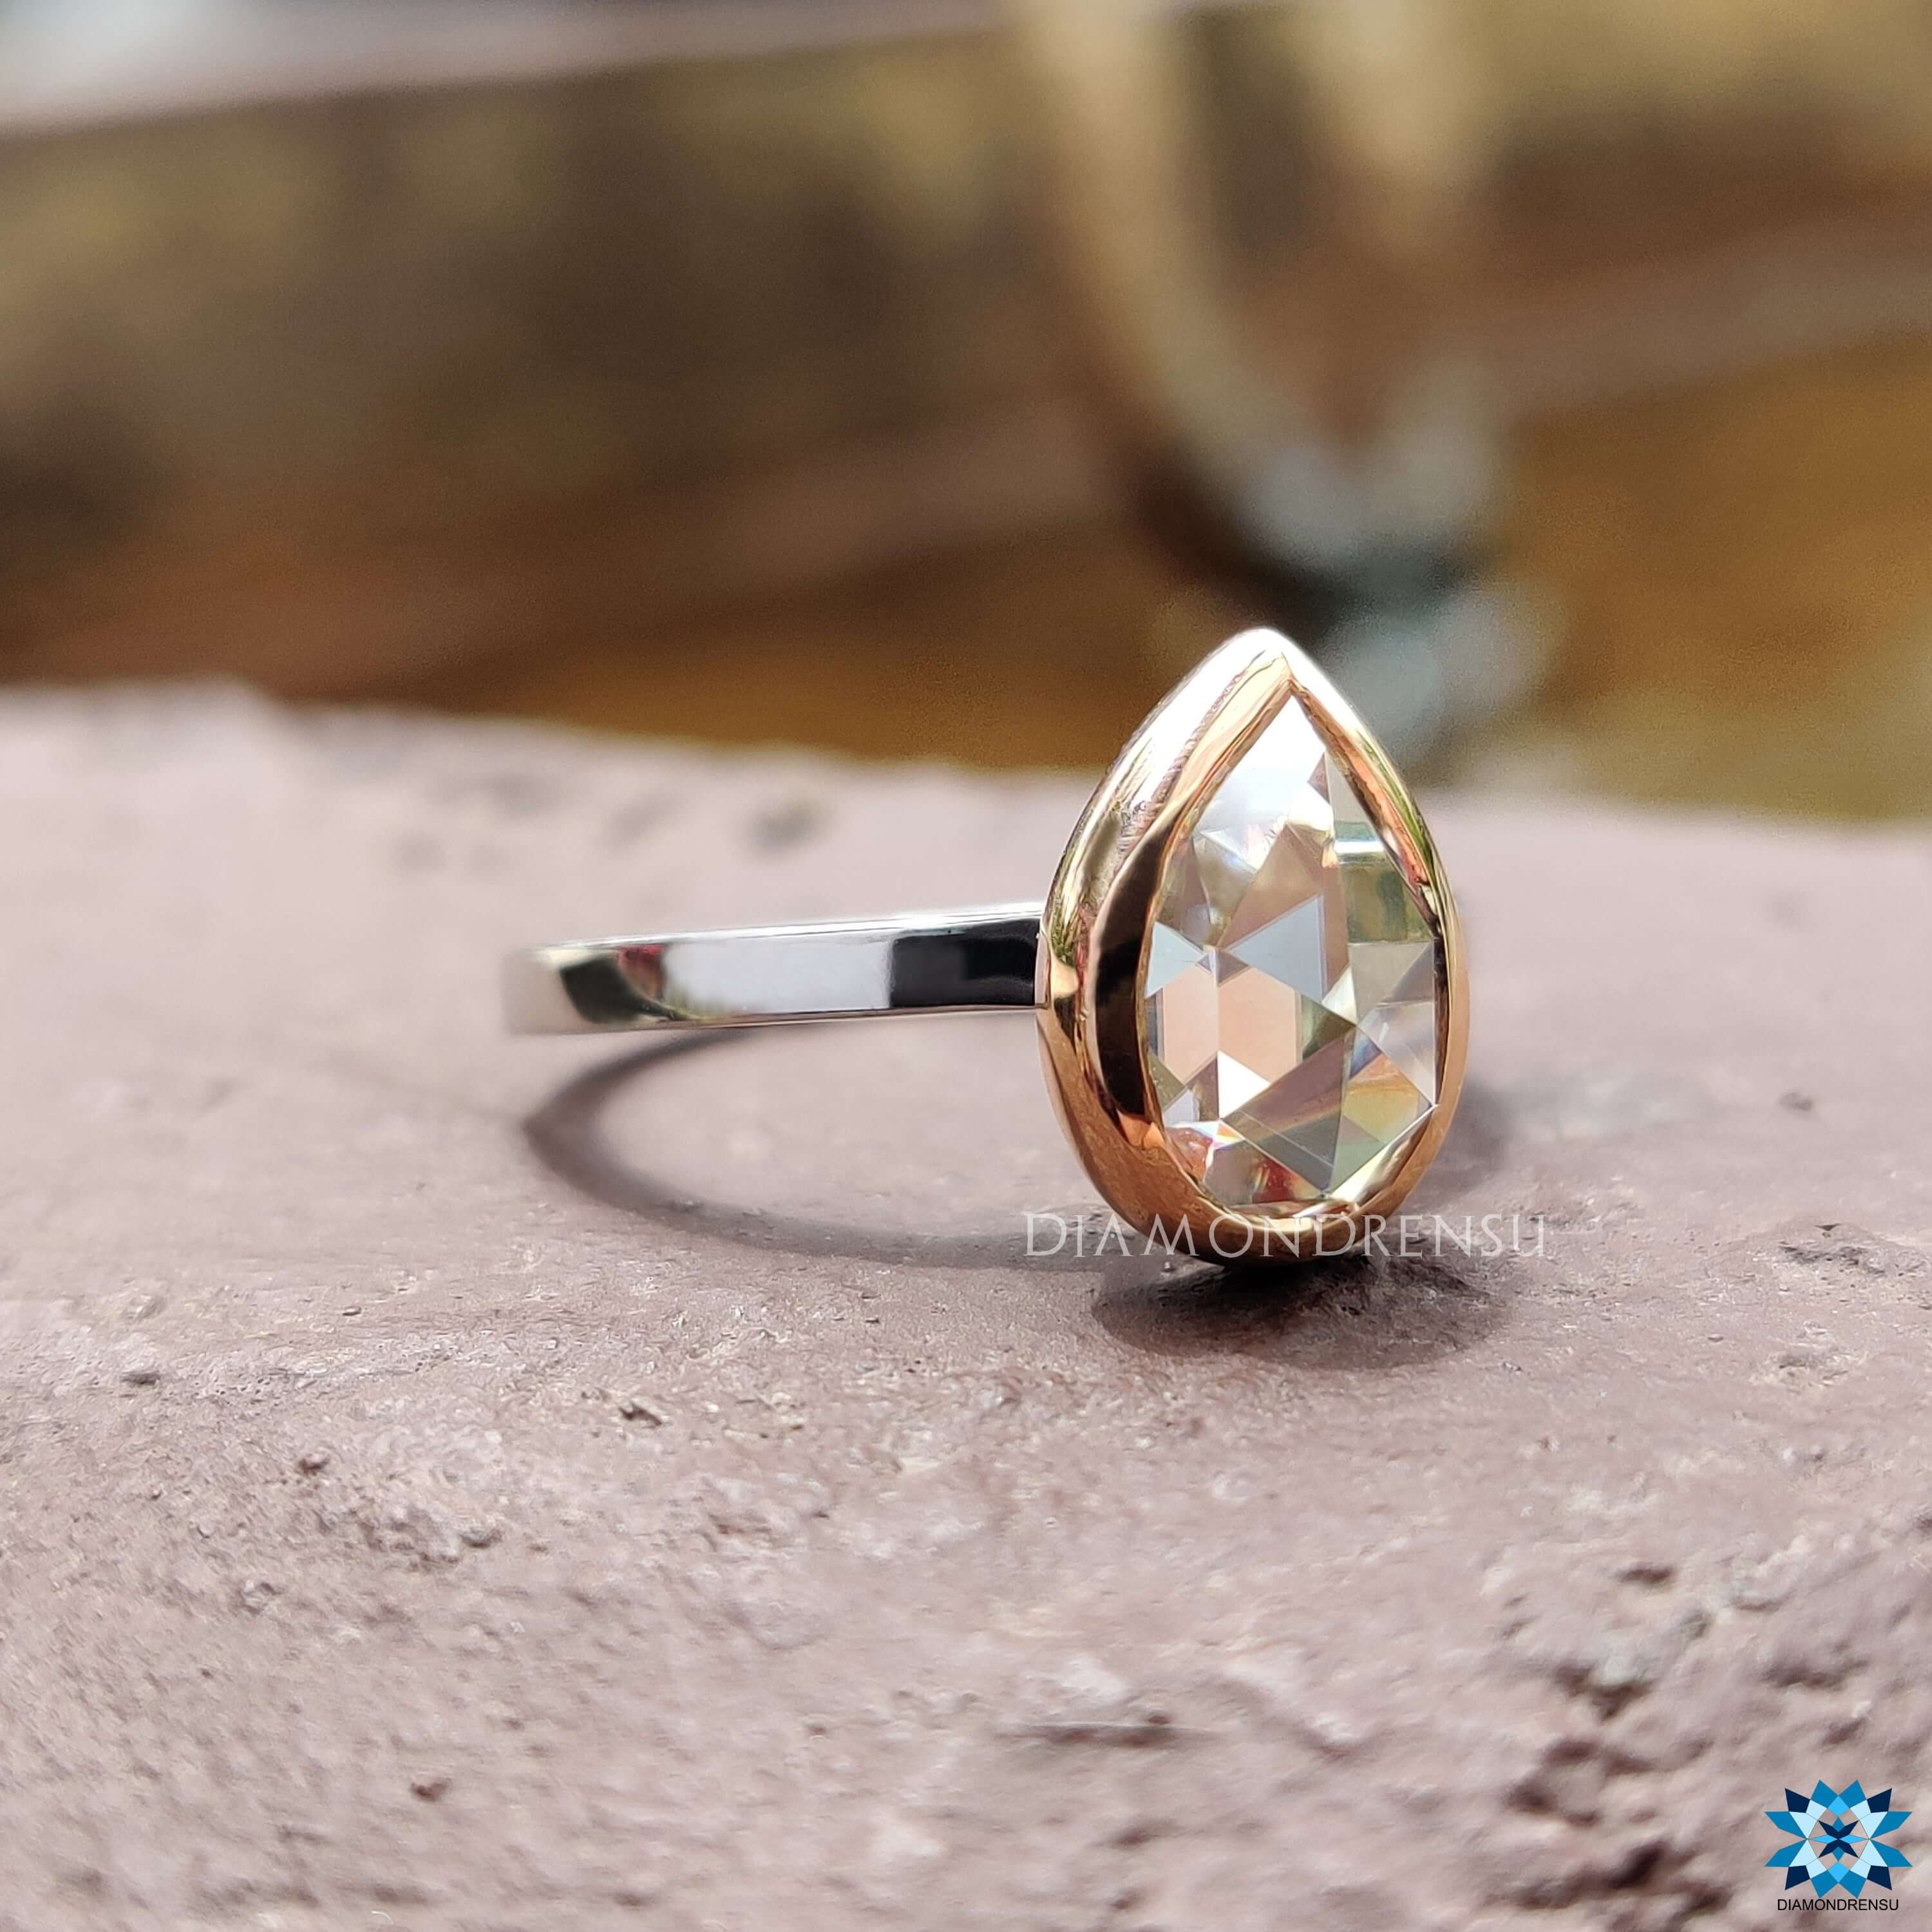 Mackena: Two-Toned Solitaire Engagement Ring with a Thin Band | Ken & Dana  Design